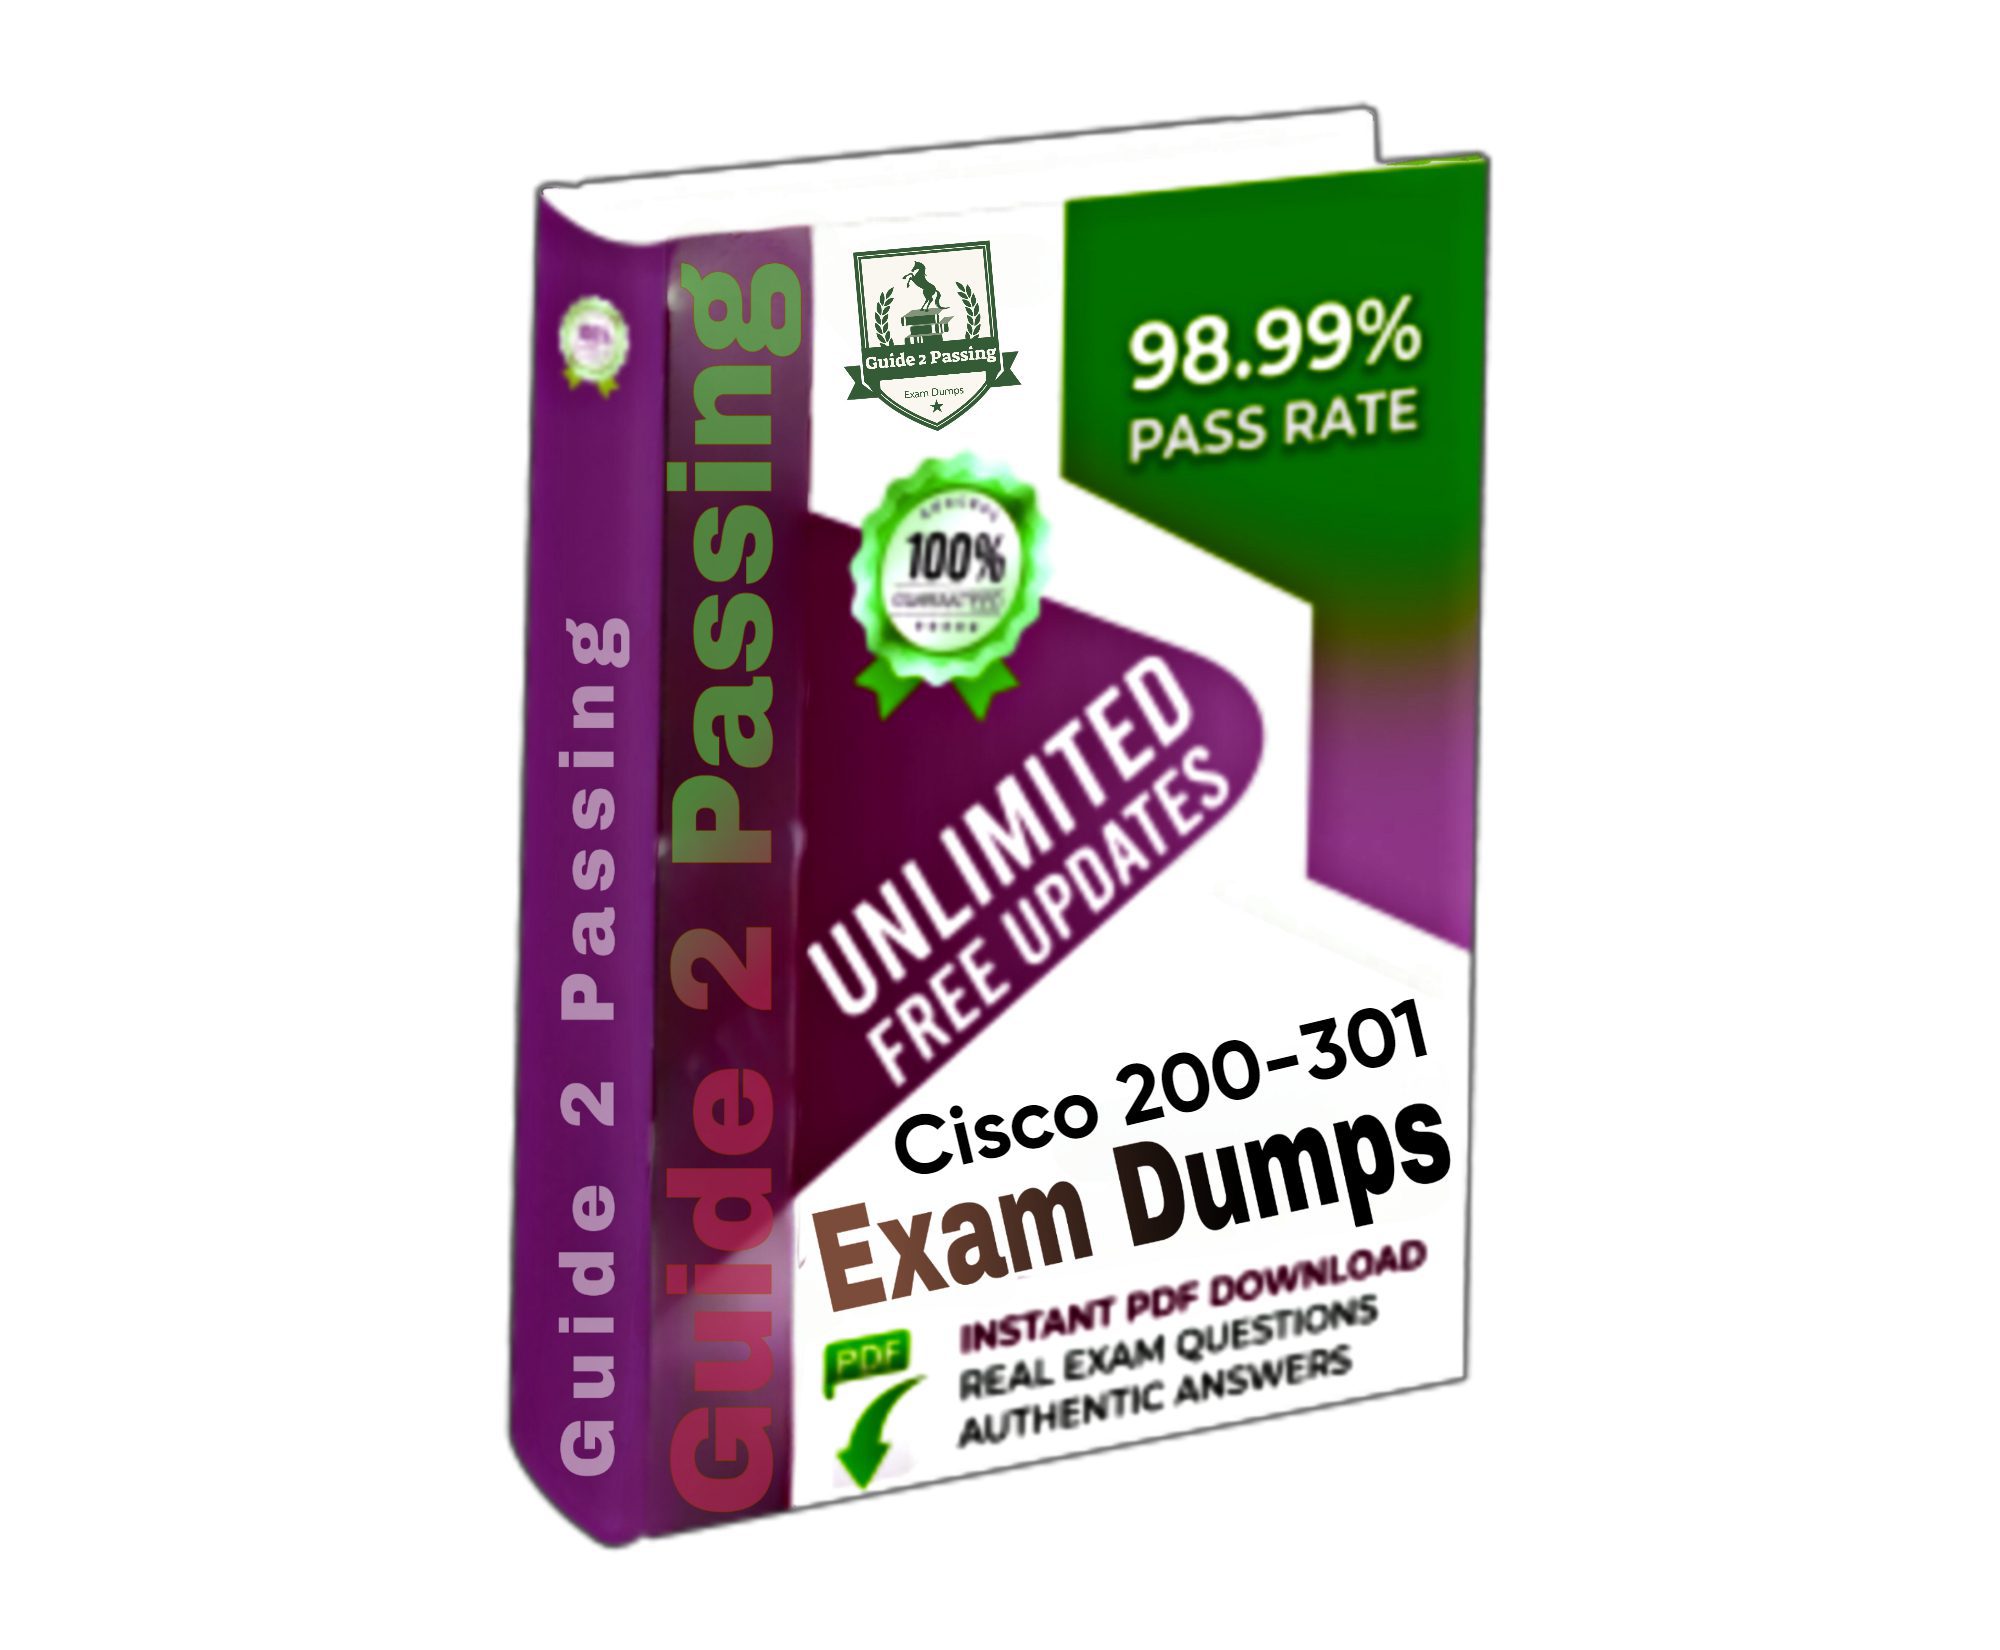 Pass Your Cisco 200-301 Exam Dumps From Guide 2 Passing